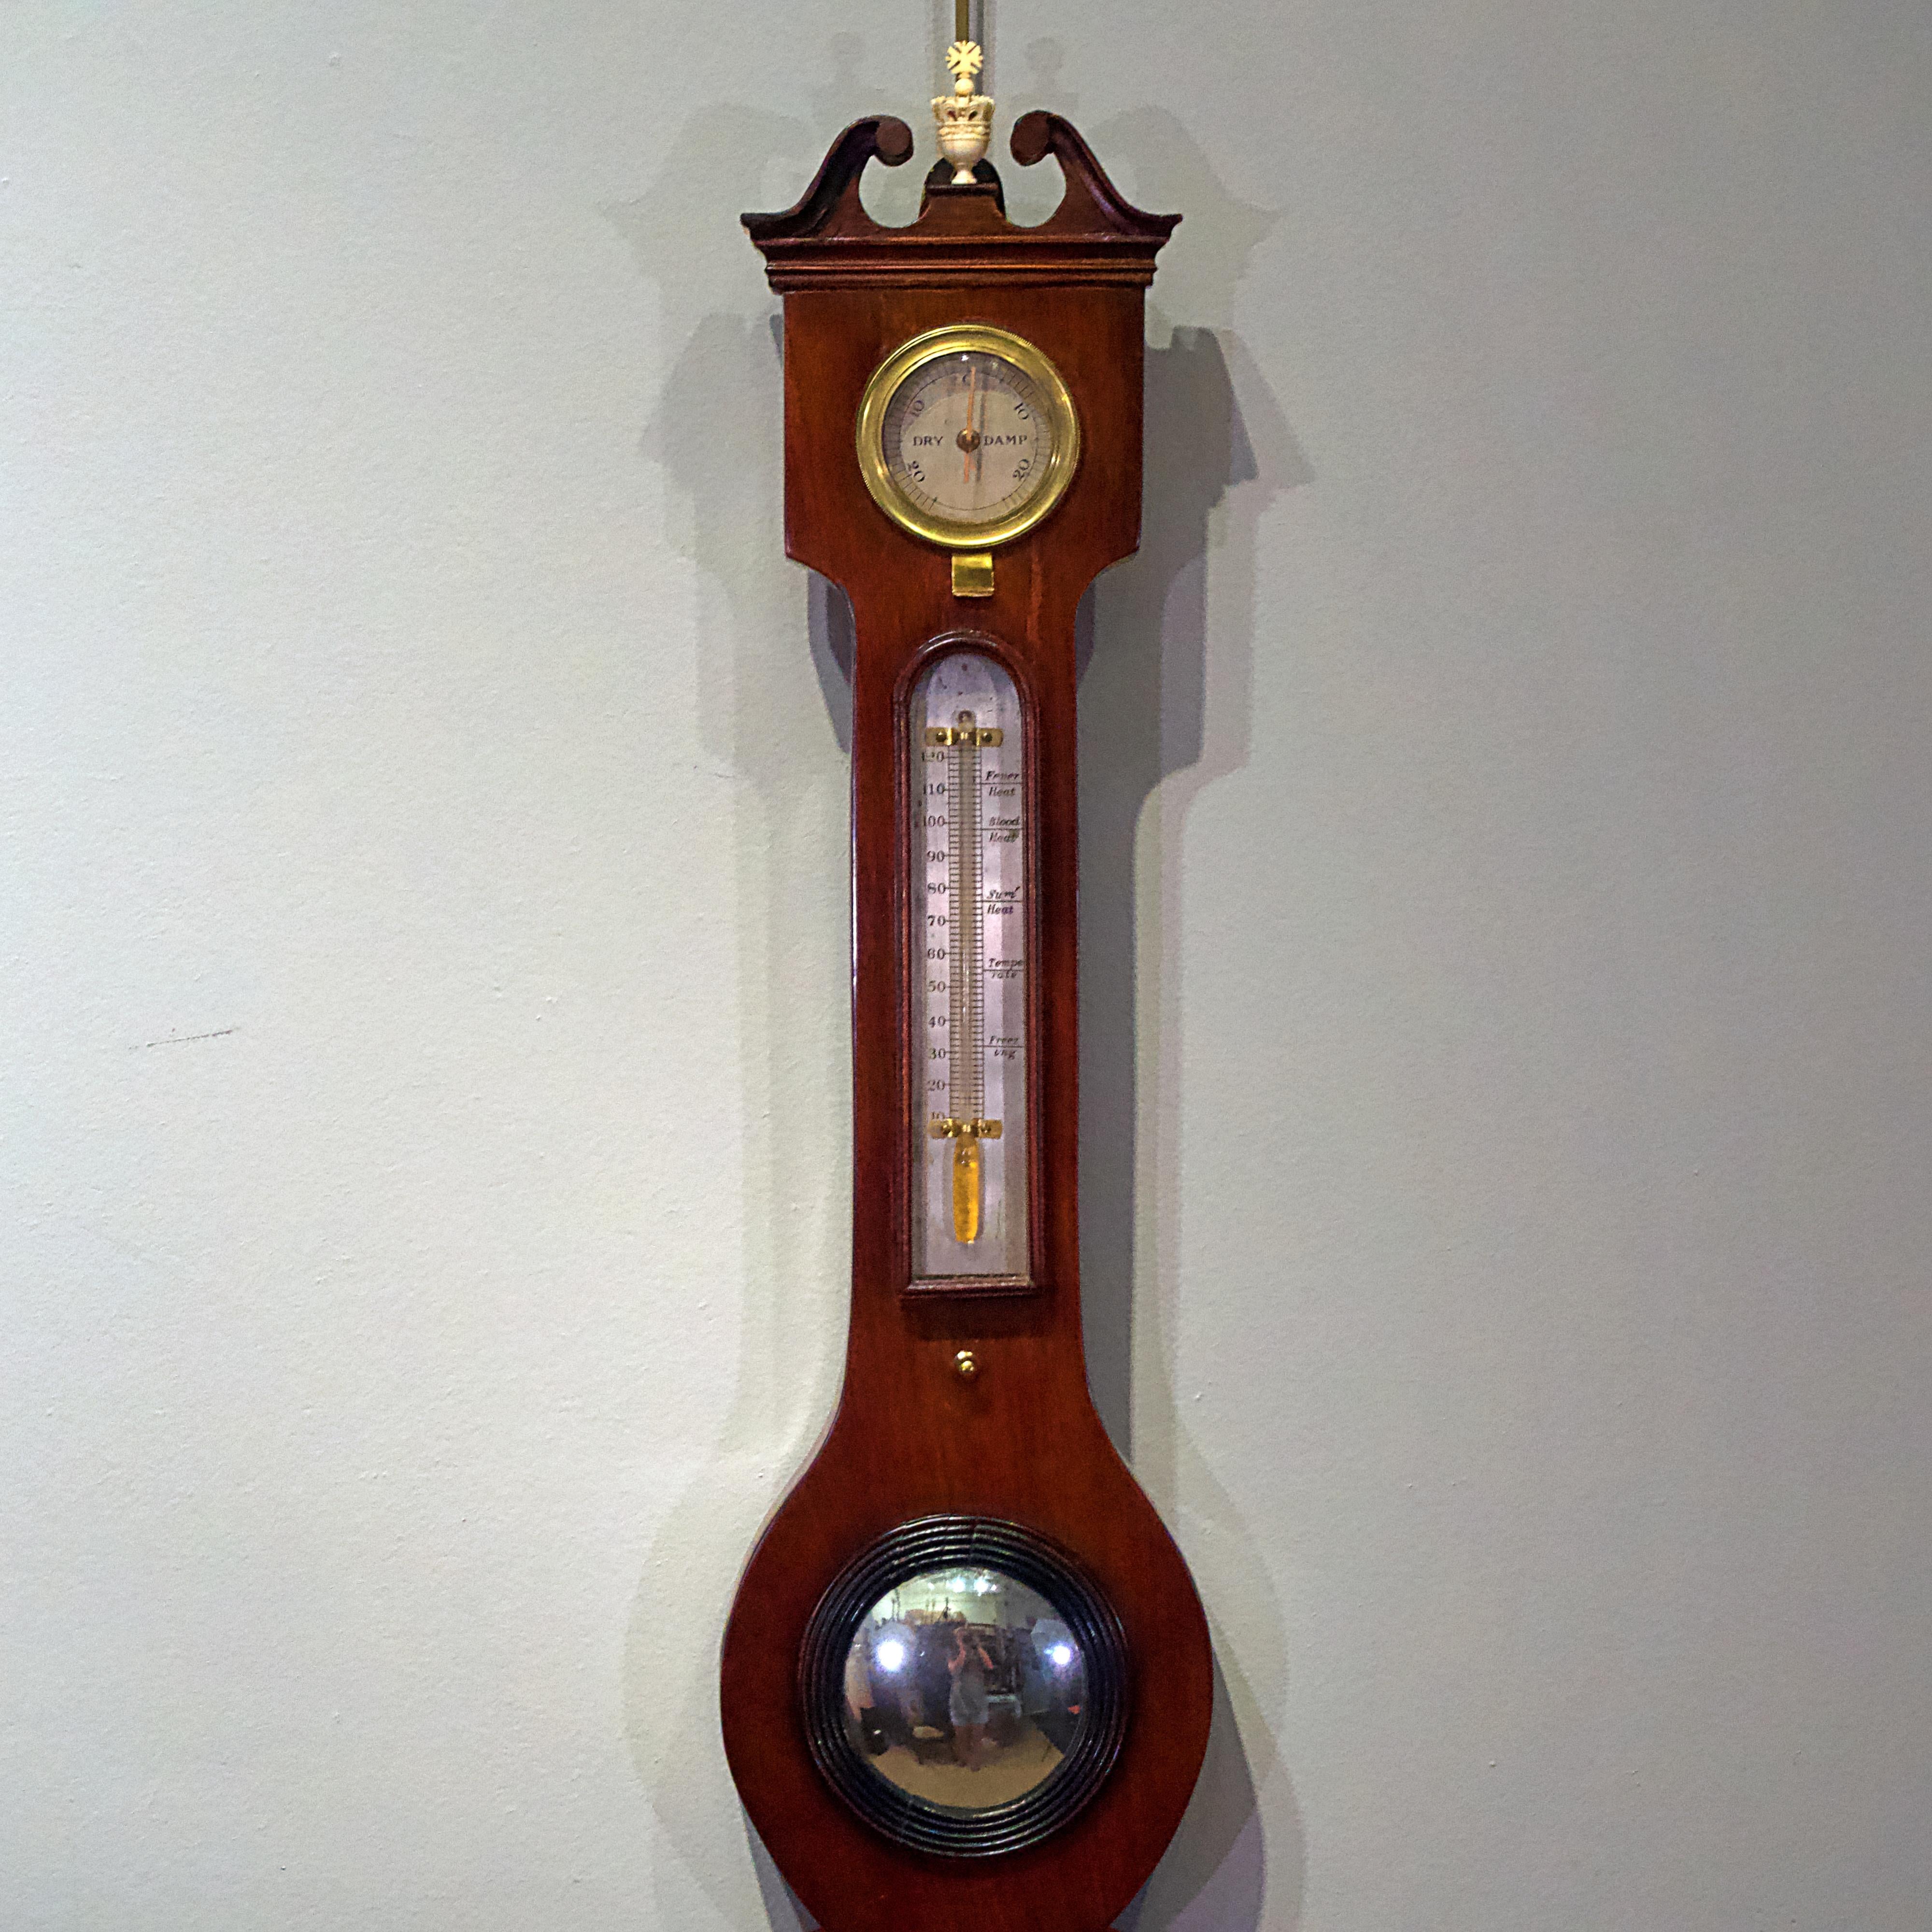 Late 18th century banjo barometer, with thermometer, level, convex plate, bone carved crown finial
Brass bezels and glass.